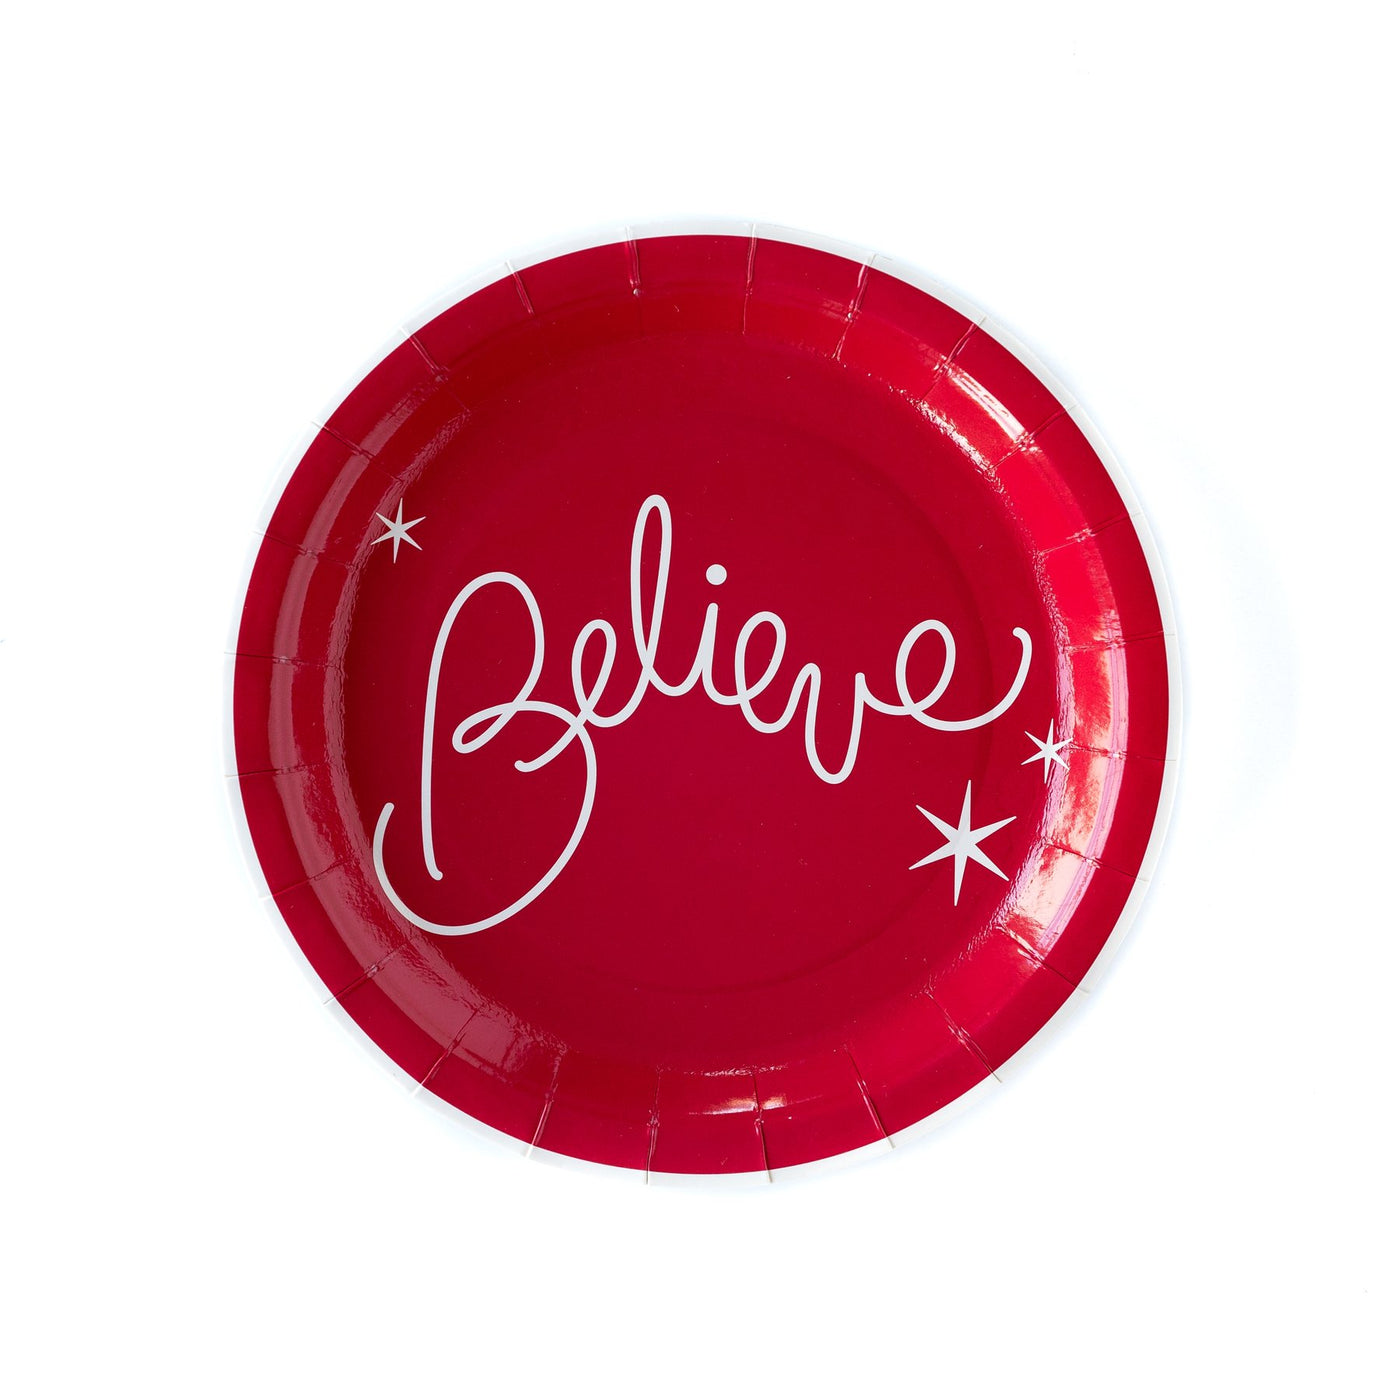 Red 9" Believe Plates